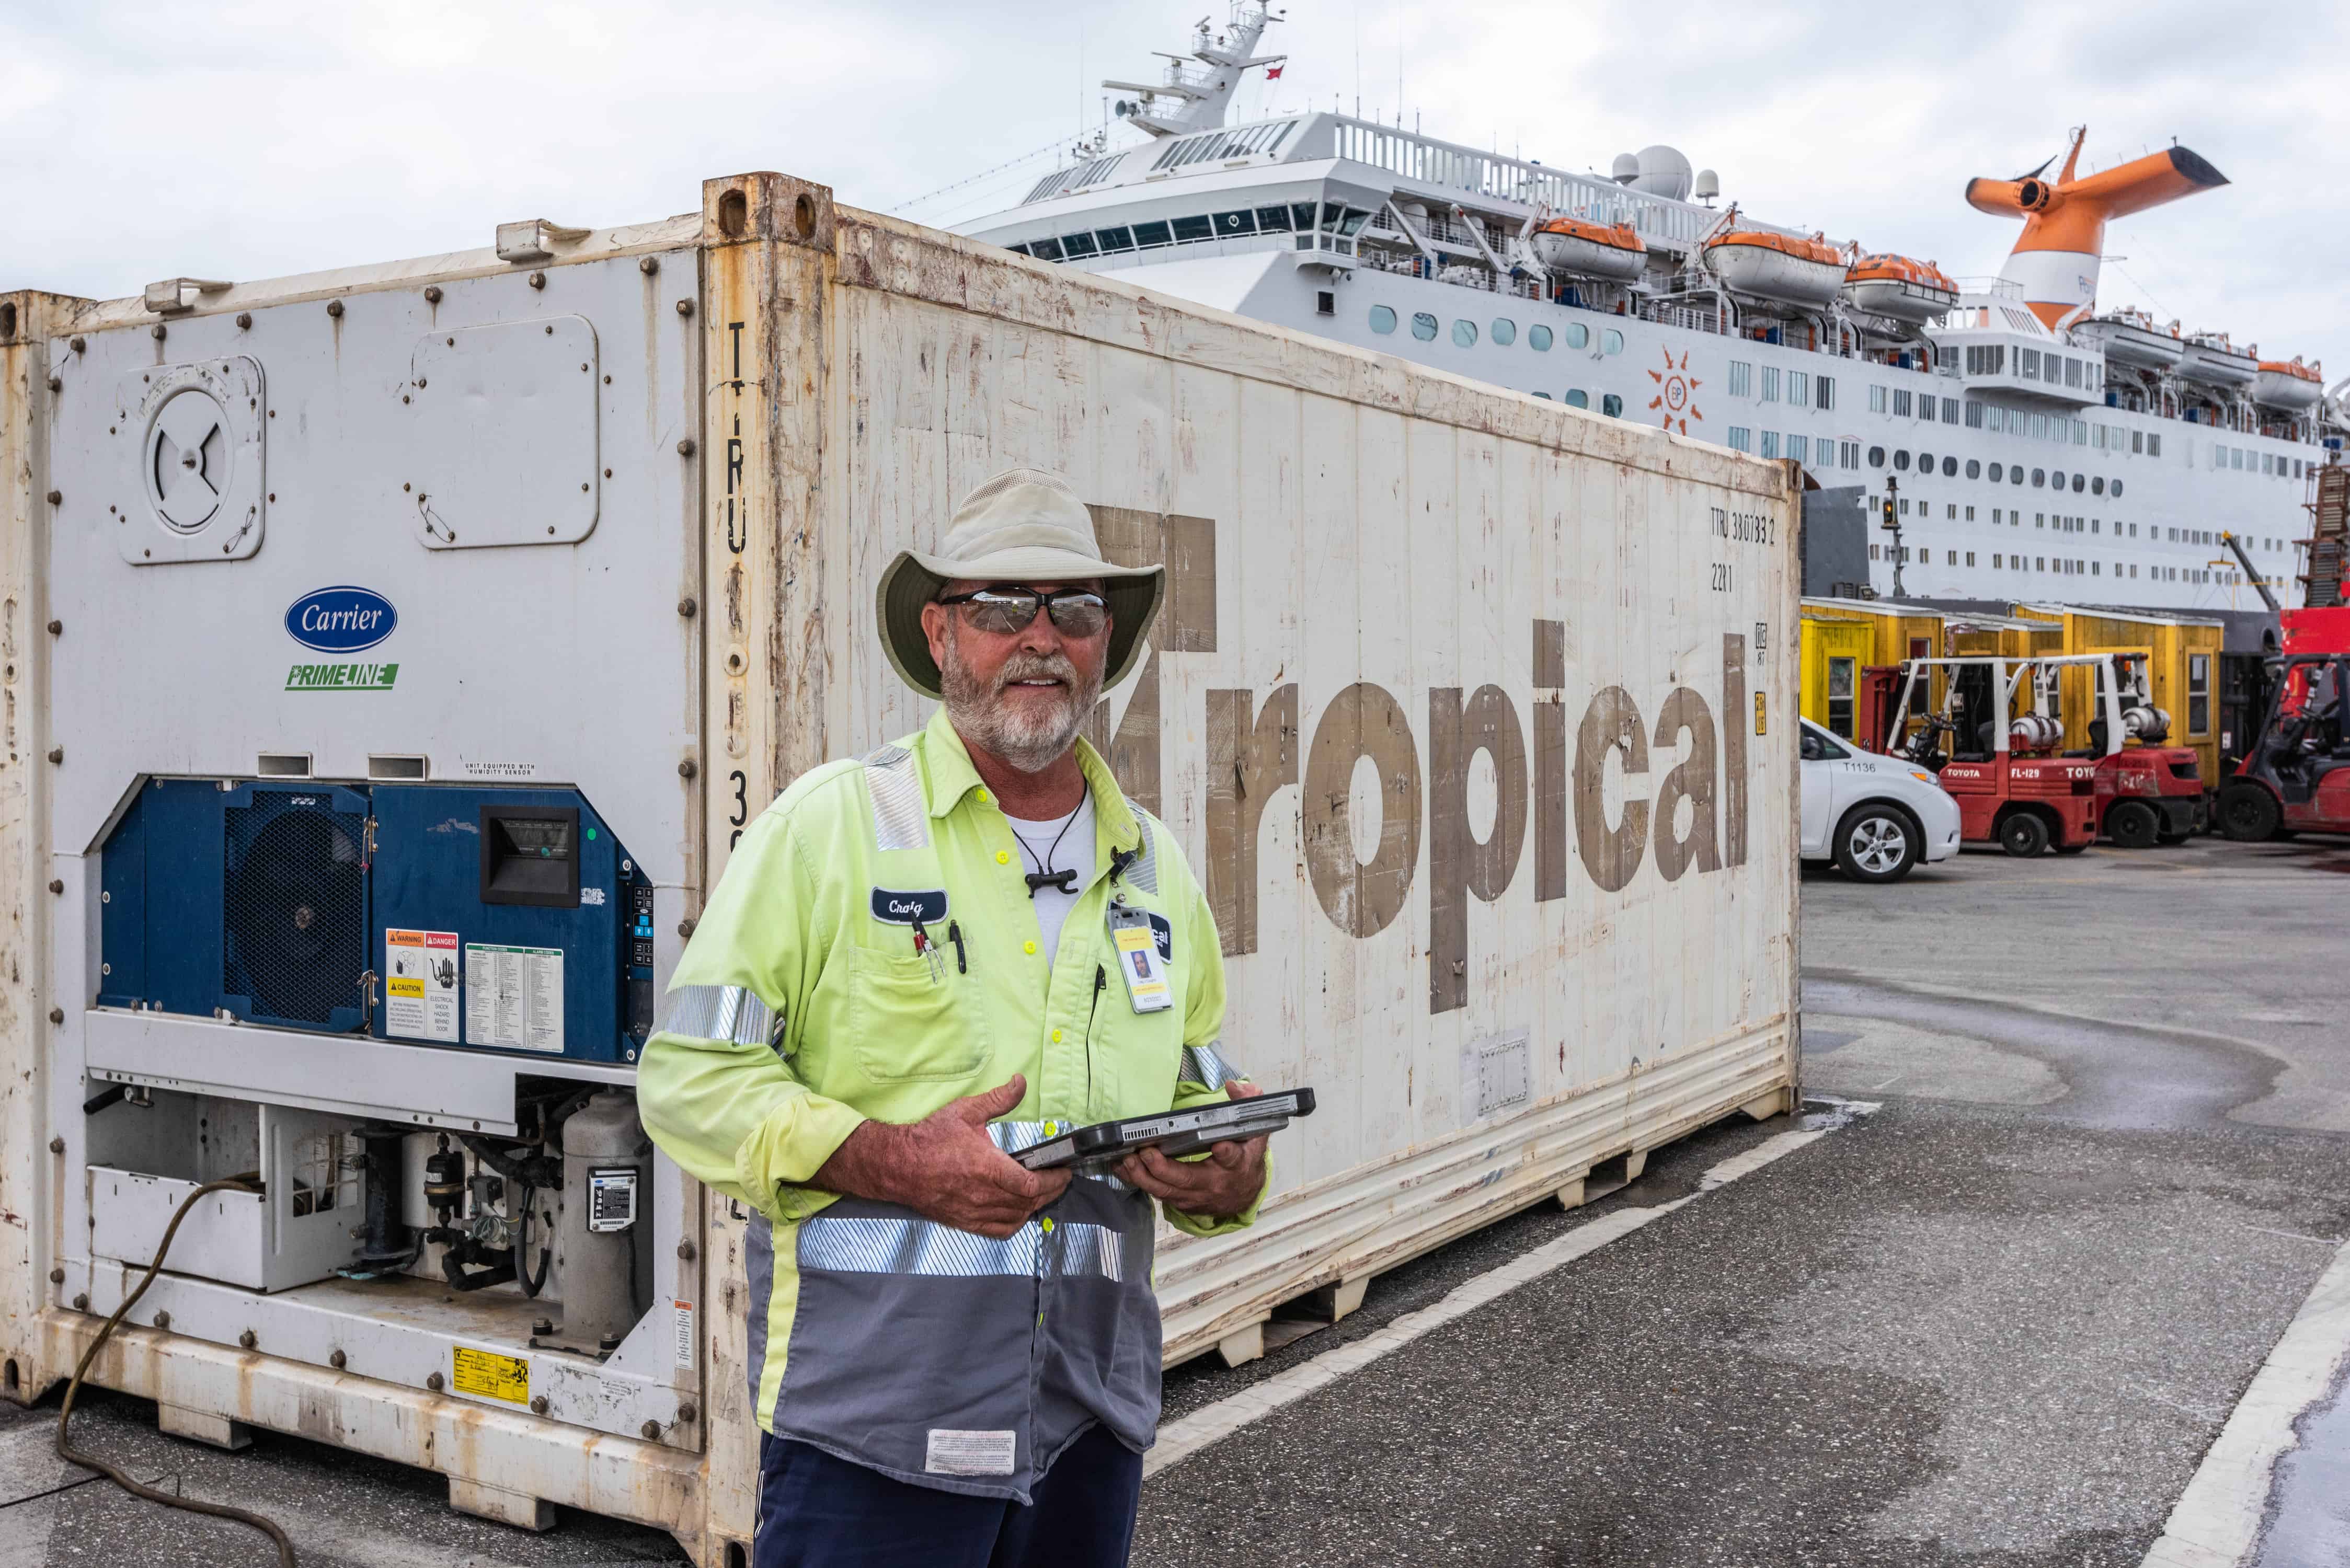 Coughlin poses in front of a Tropical shipping container, wearing a cowboy hat.